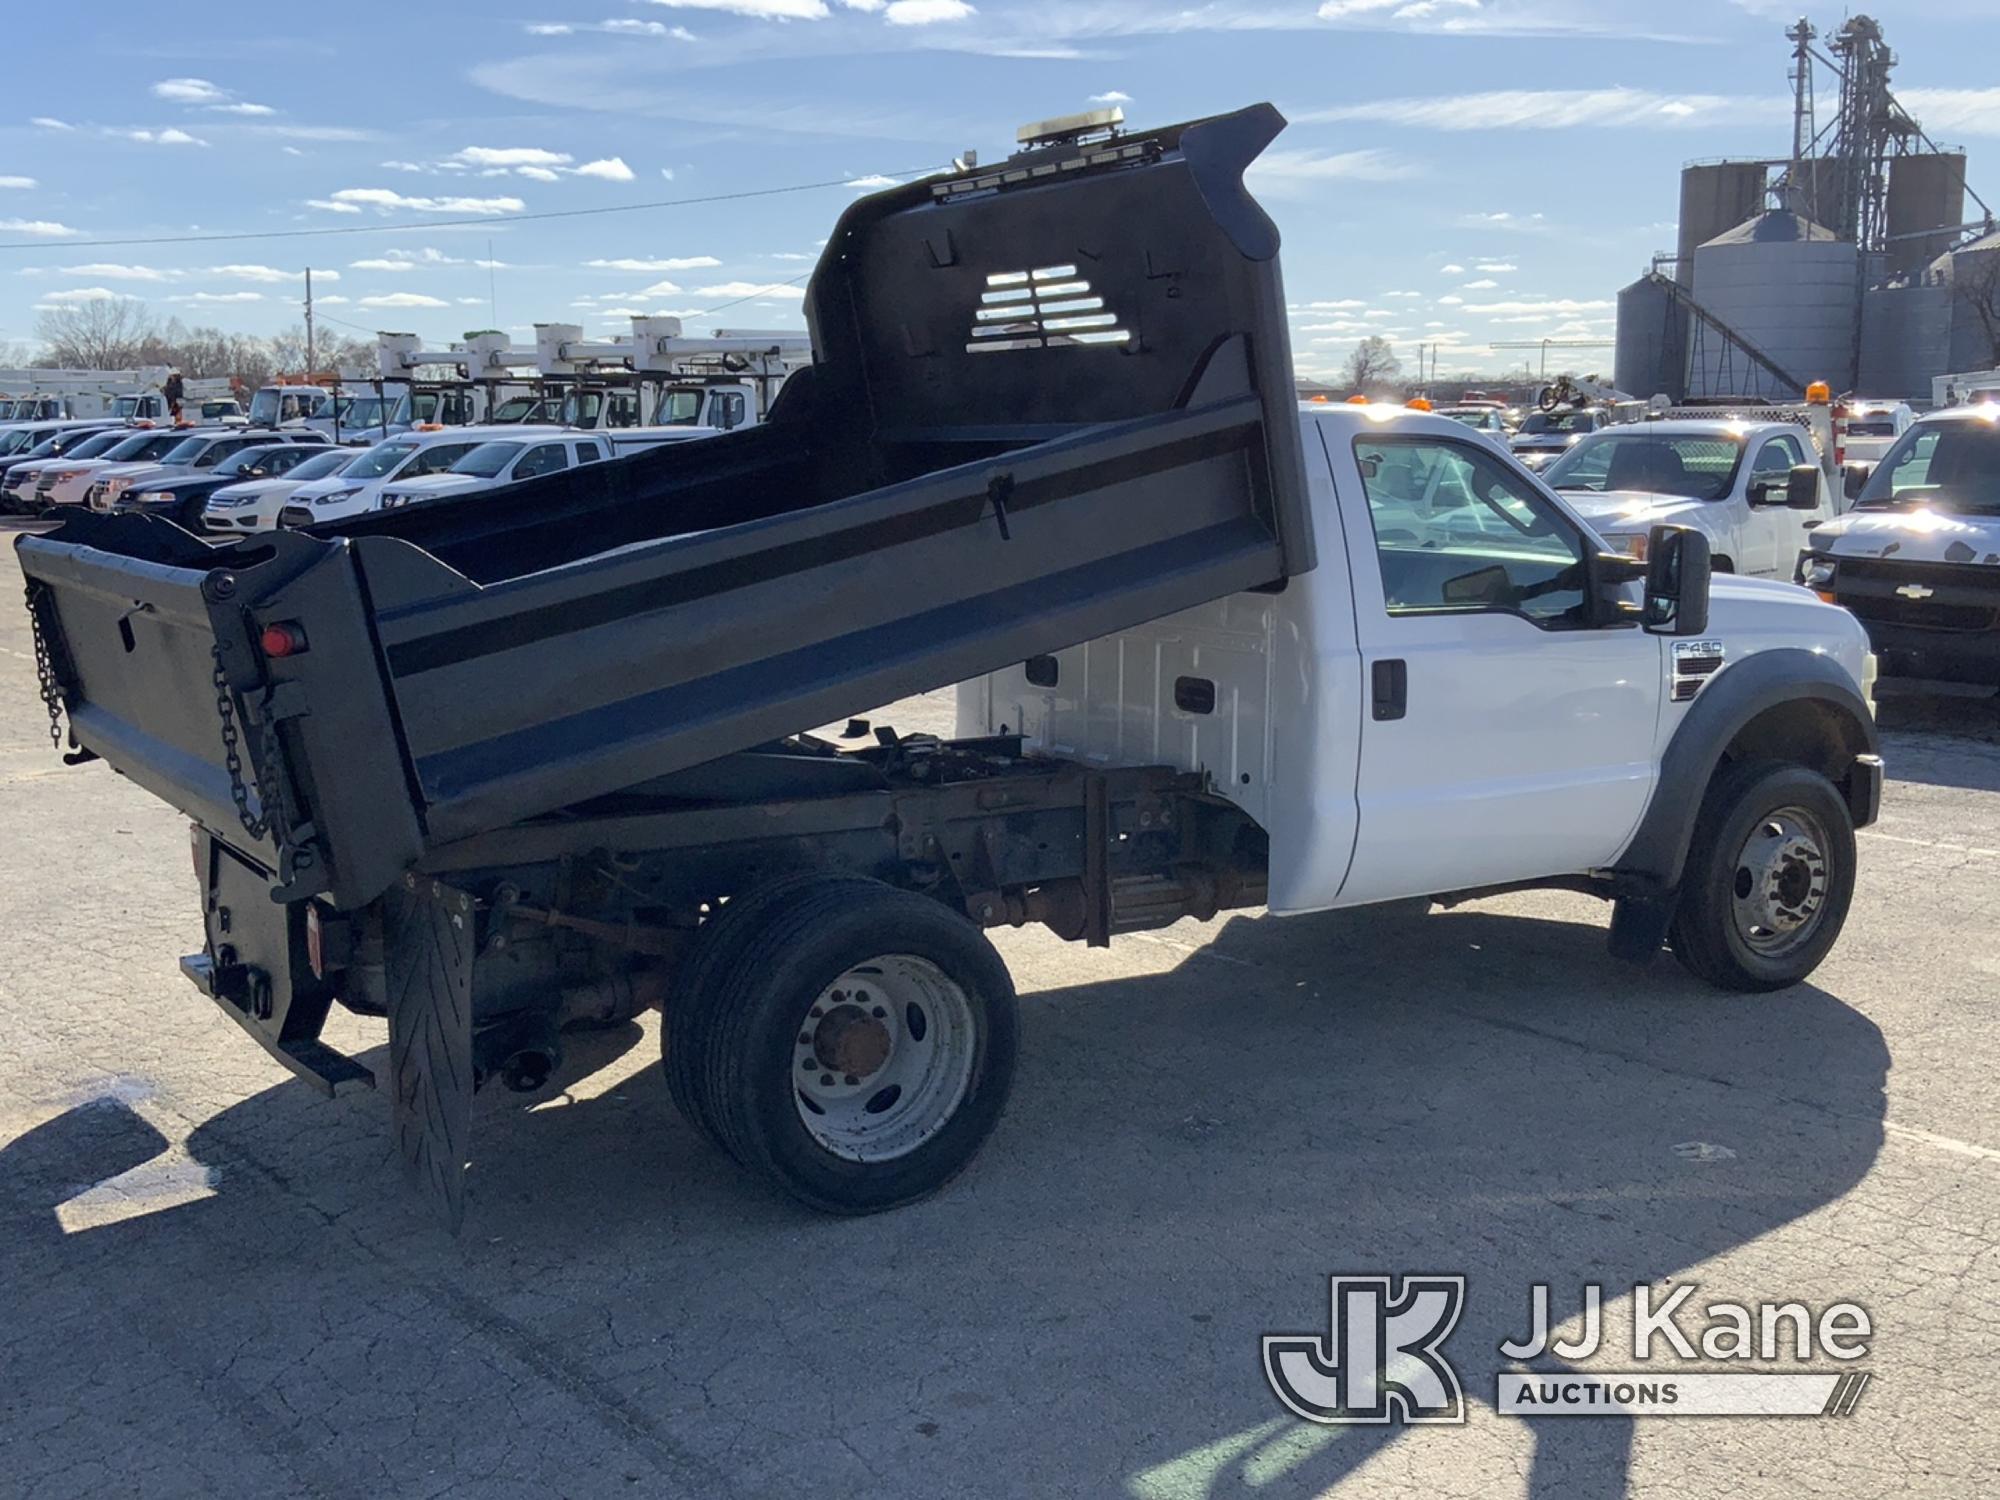 (South Beloit, IL) 2008 Ford F450 Dump Truck Runs, Moves & Dump Bed Operates) (Seller States: New Mo